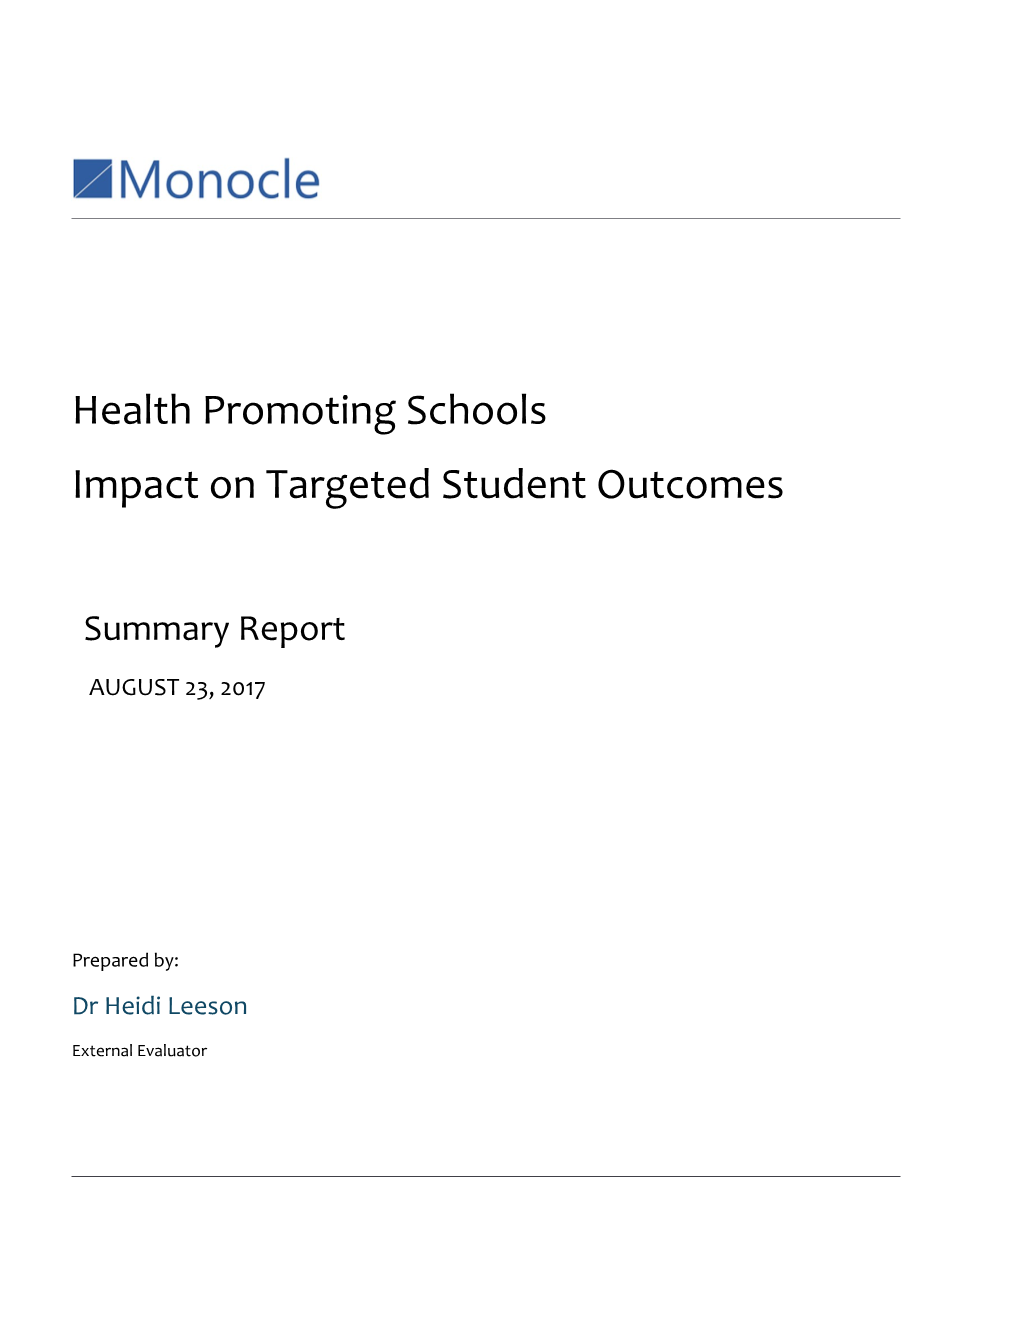 Health Promoting Schools: Impact on Targeted Student Outcomes: Summary Report